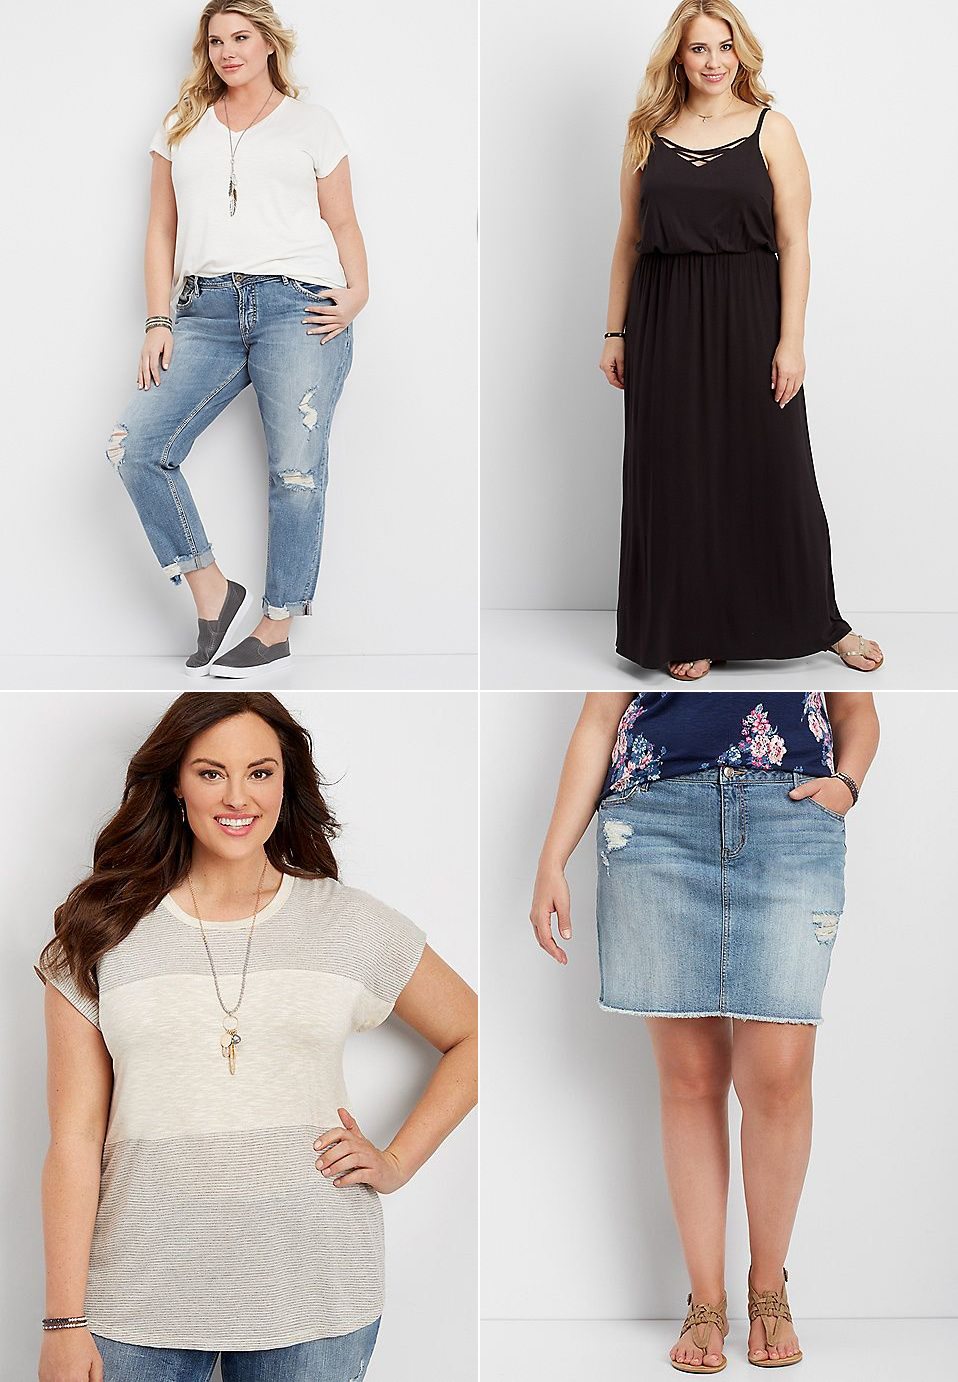 mauricesWhere to shop for stylish and trendy plus size clothing - click through for all @cydconverse's favorite places to shop! | Maurices Plus Size Clothing Review